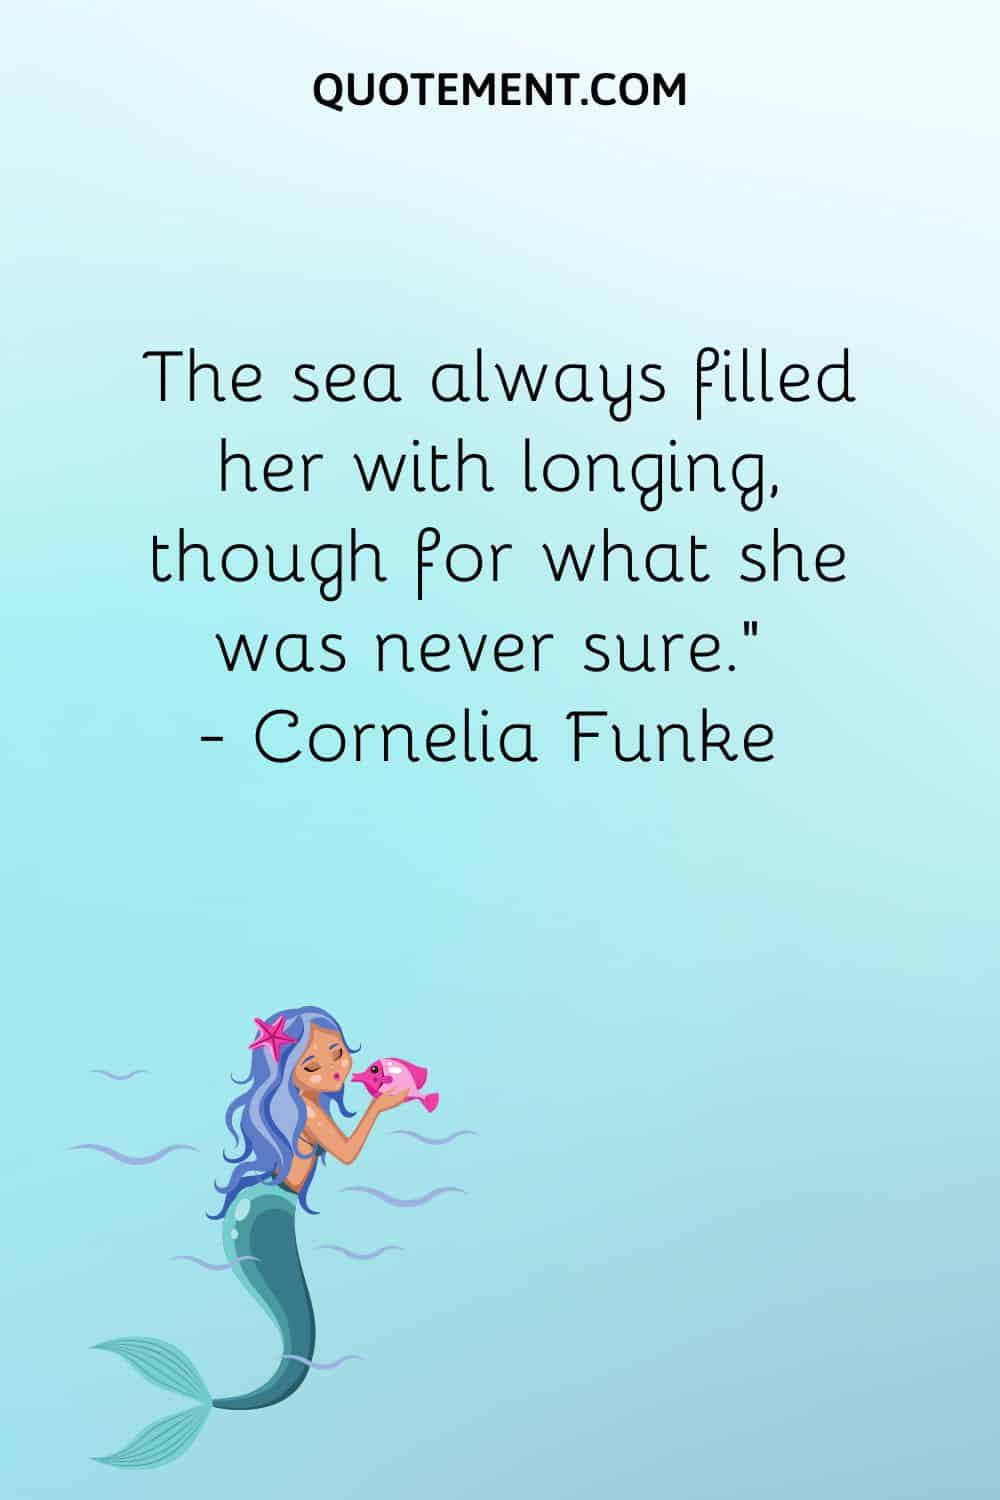 The sea always filled her with longing, though for what she was never sure.” ― Cornelia Funke